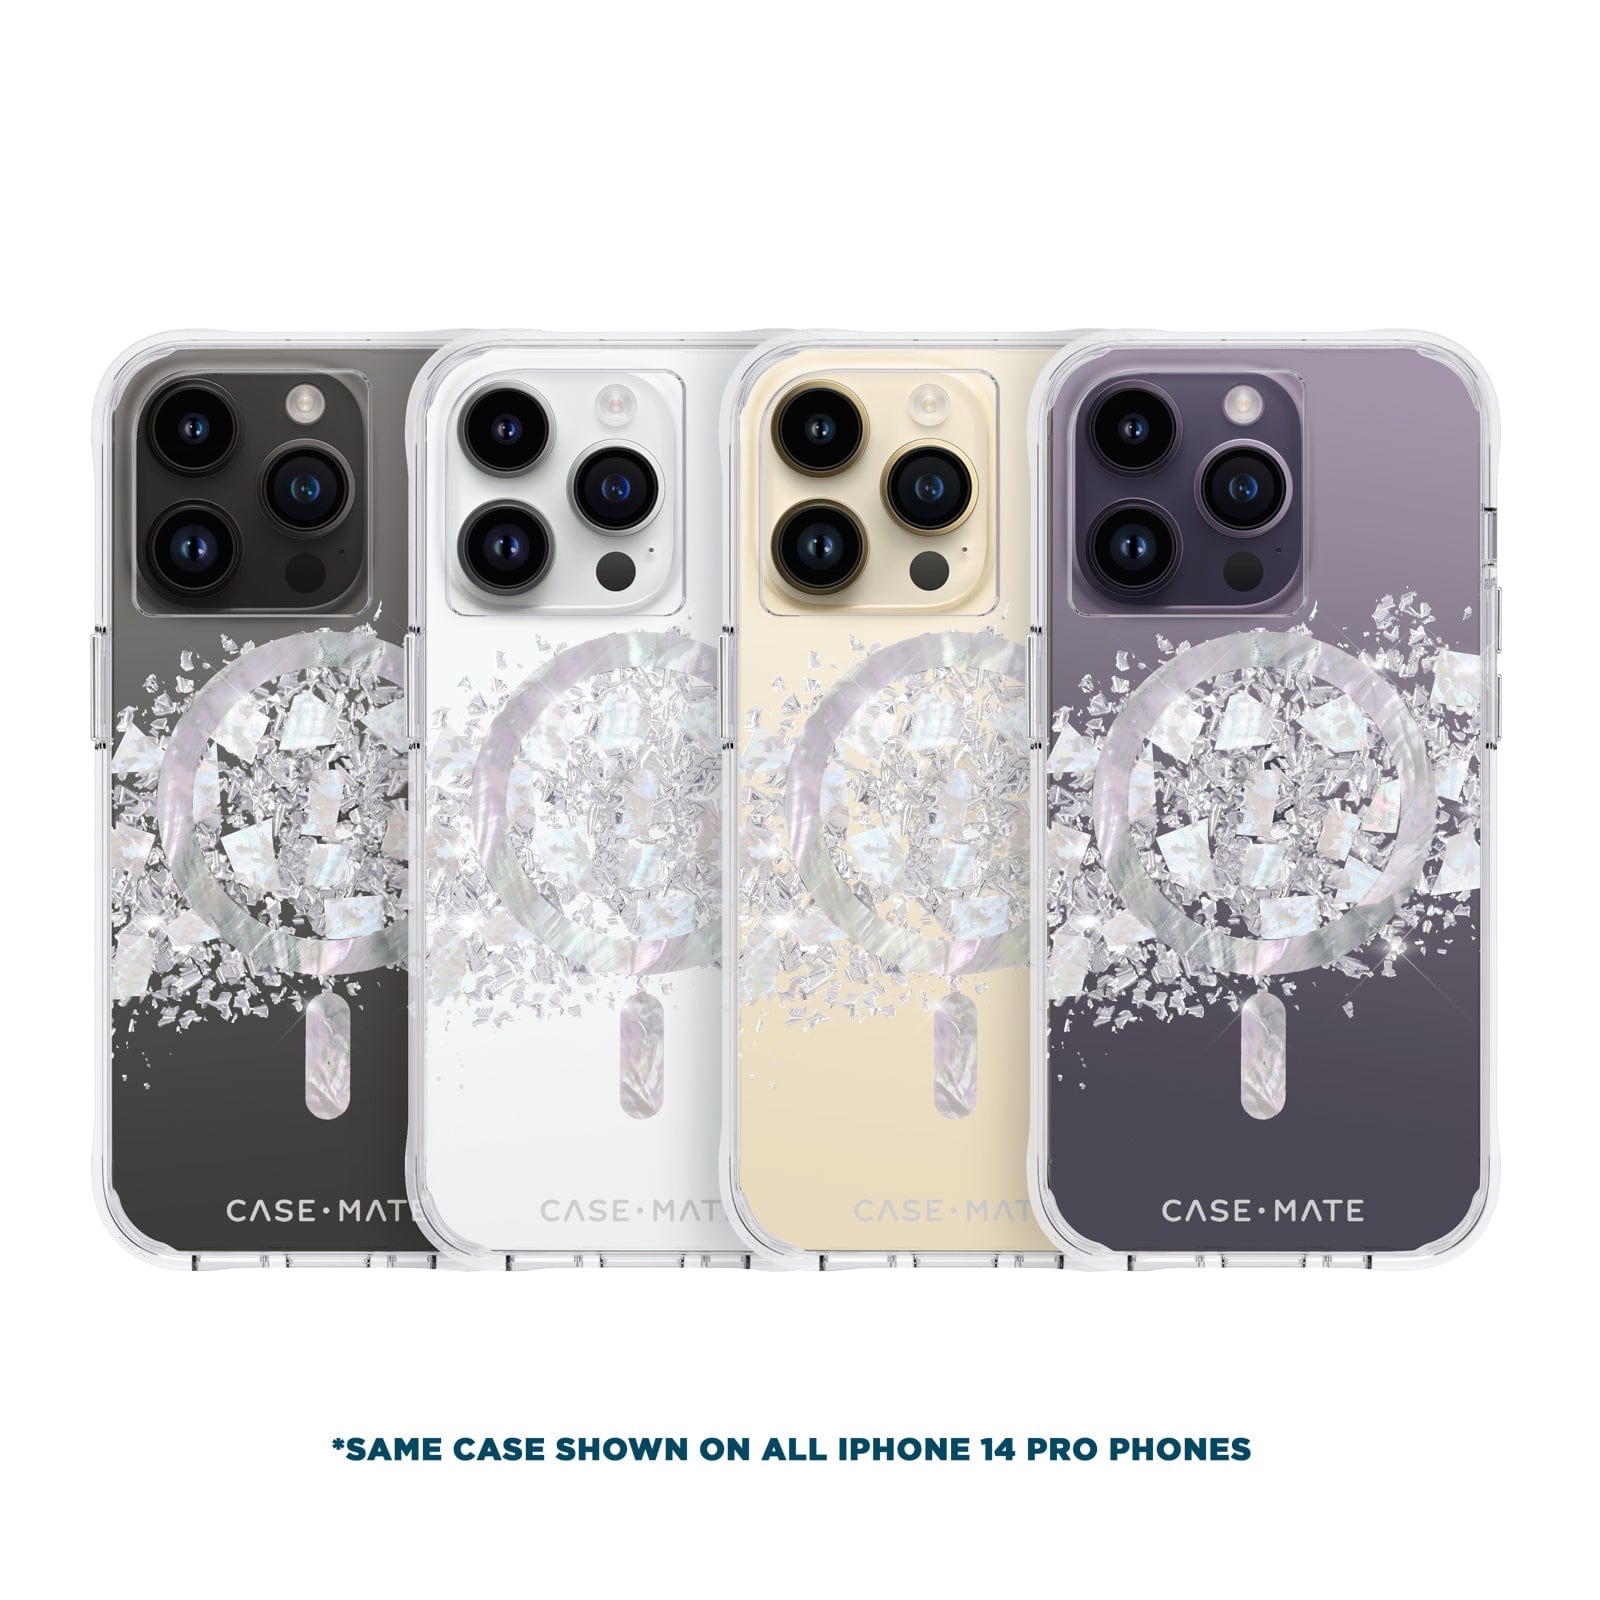 *SAME CASE SHOWN ON ALL IPHONE 14 PRO PHONES